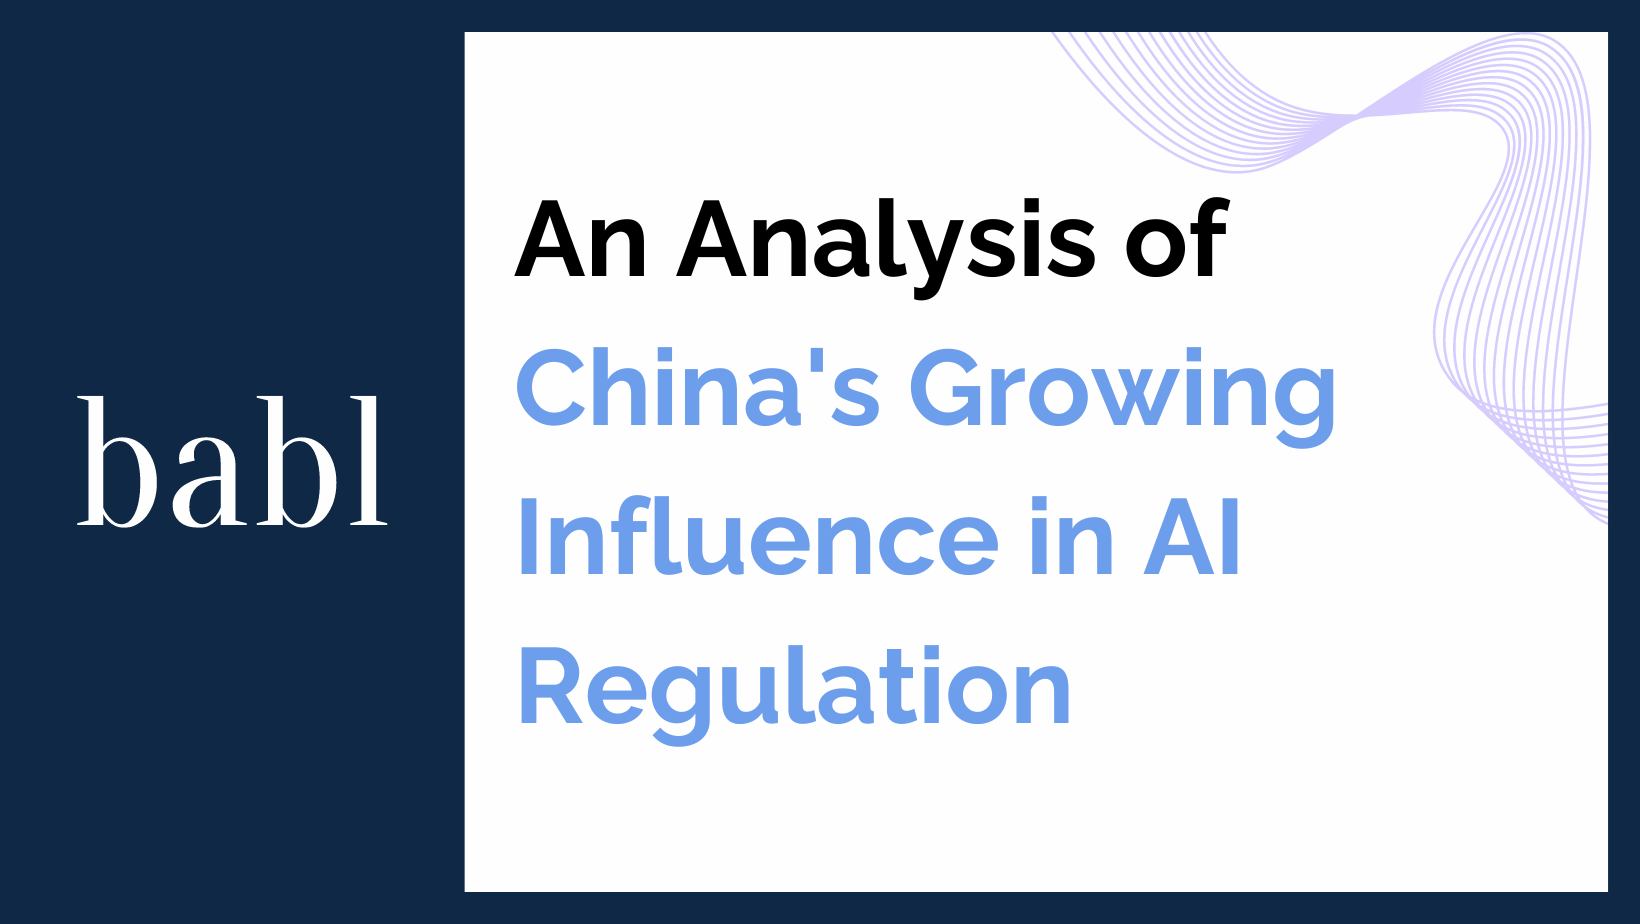 An Analysis of China’s Growing Influence in AI Regulation